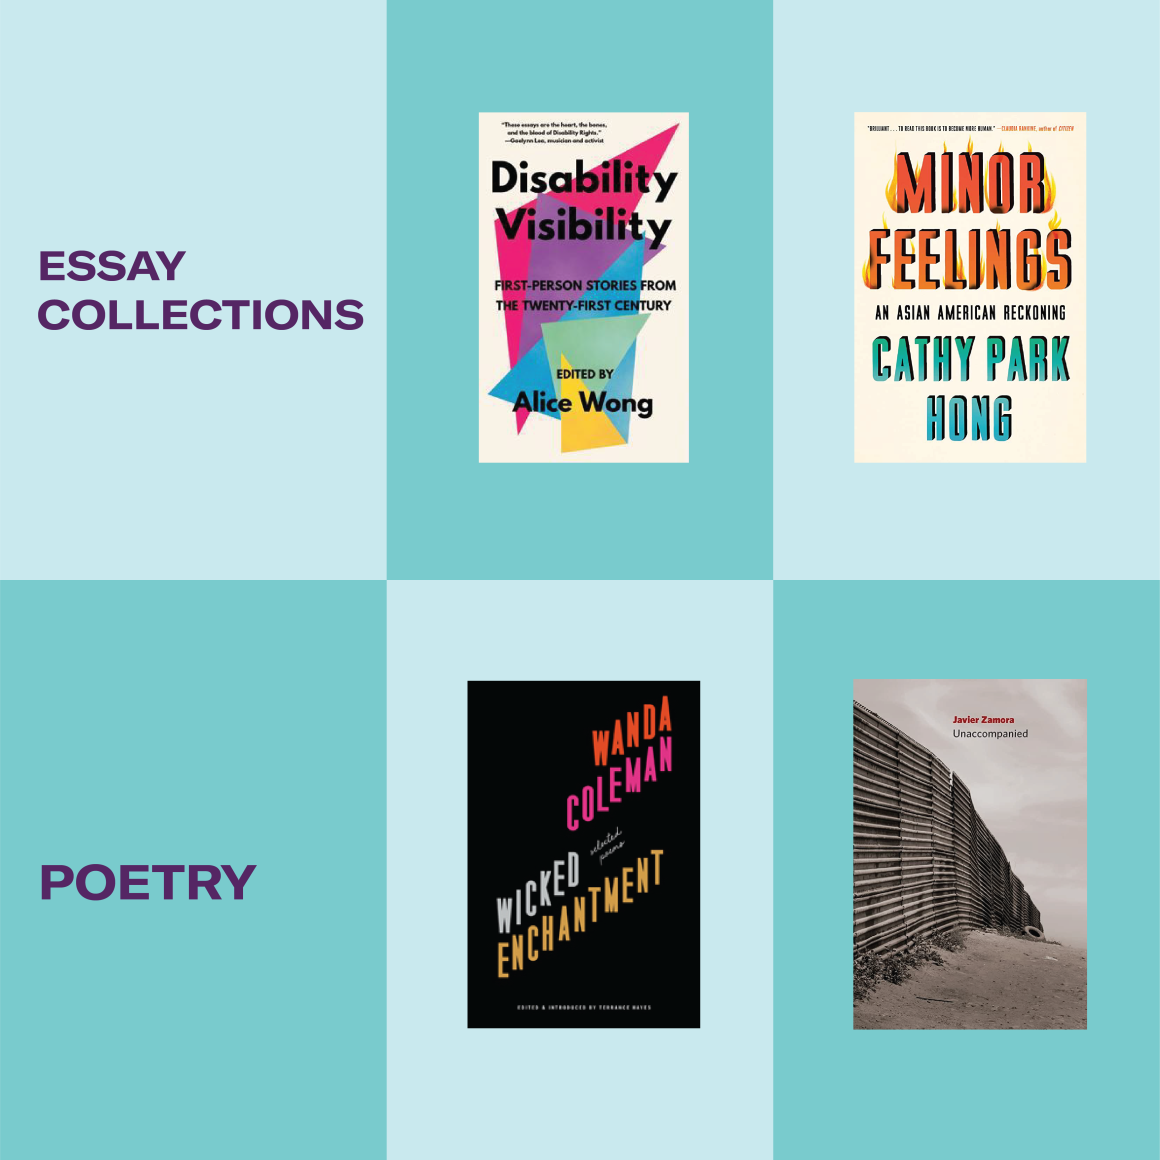 Essay Collections and Poetry